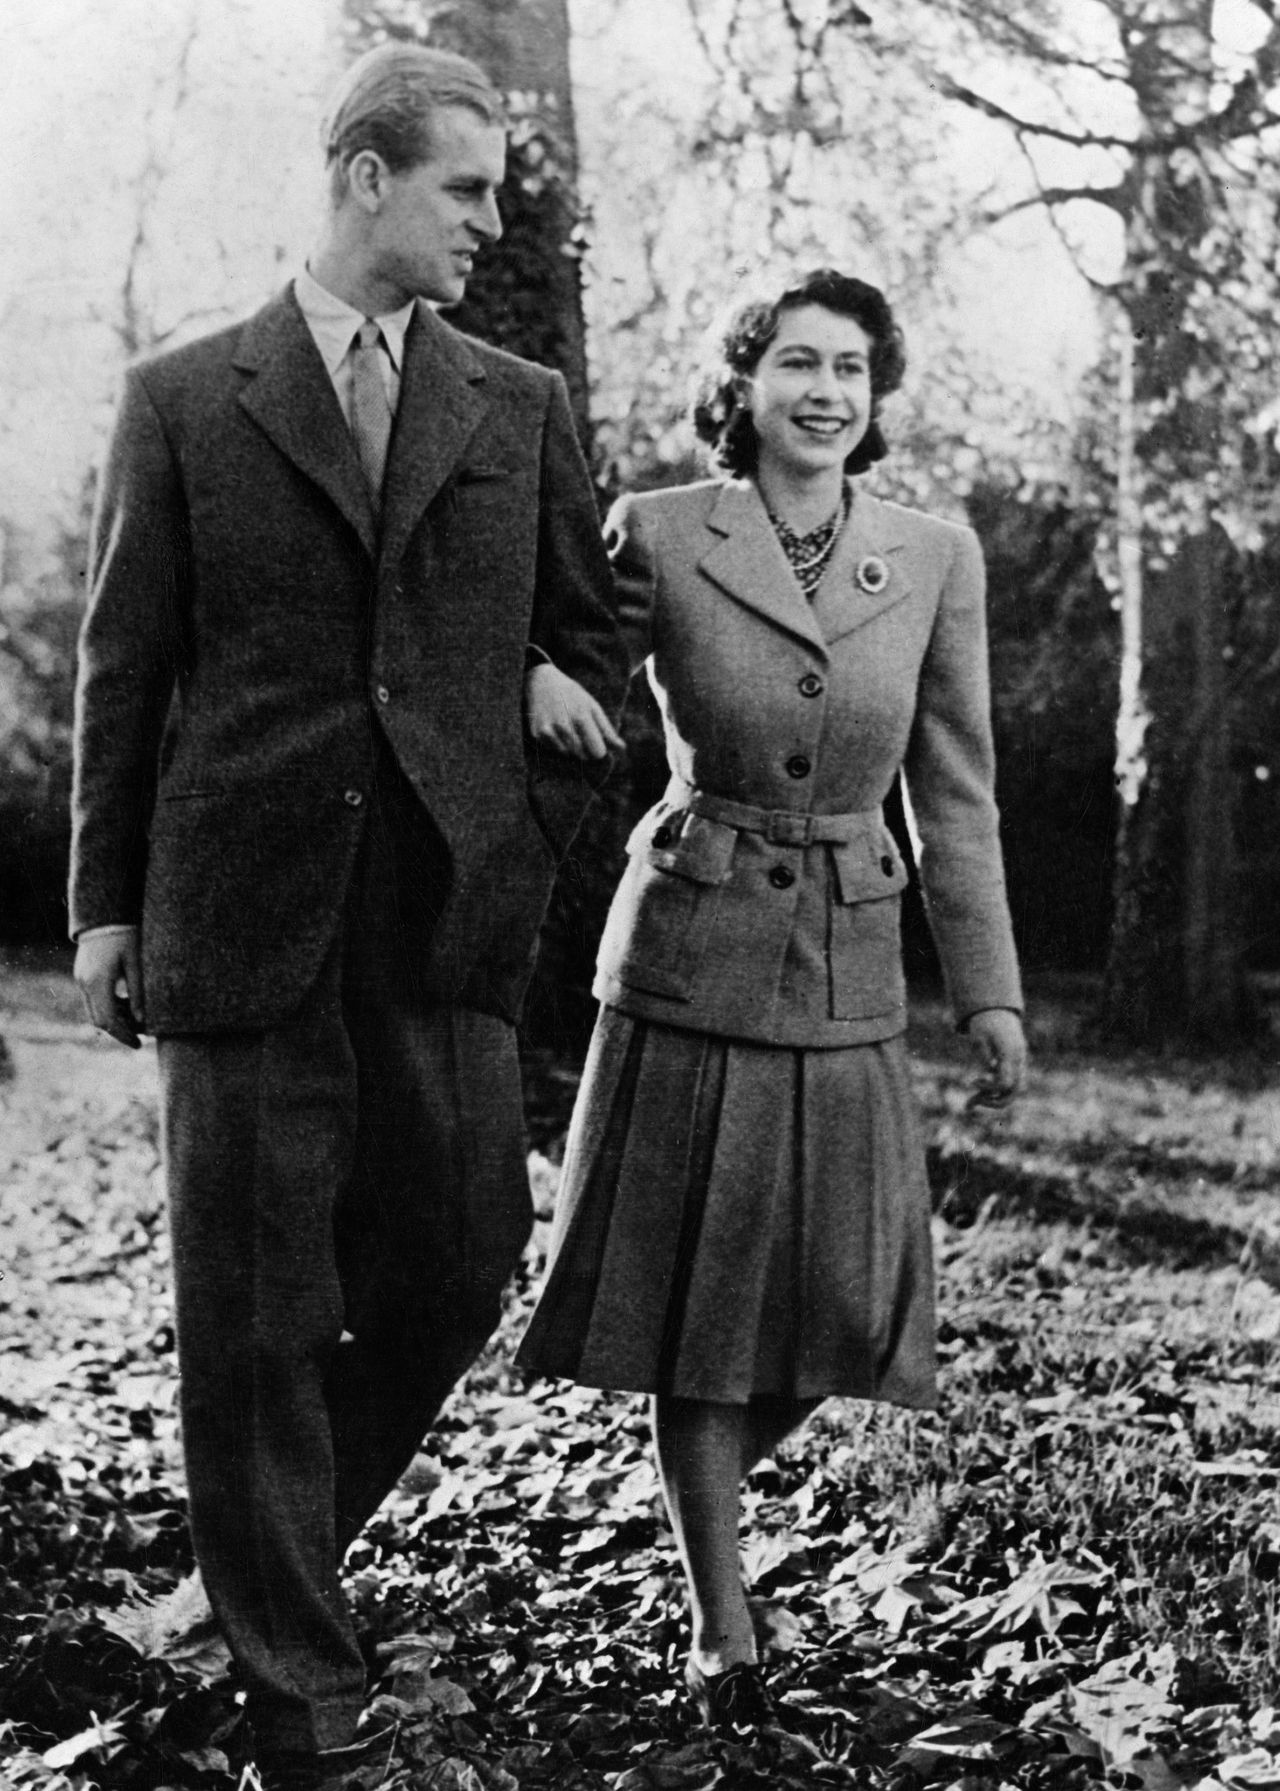 The Queen and the Duke of Edinburgh spent much of their winter honeymoon in Broadlands, Hampshire 